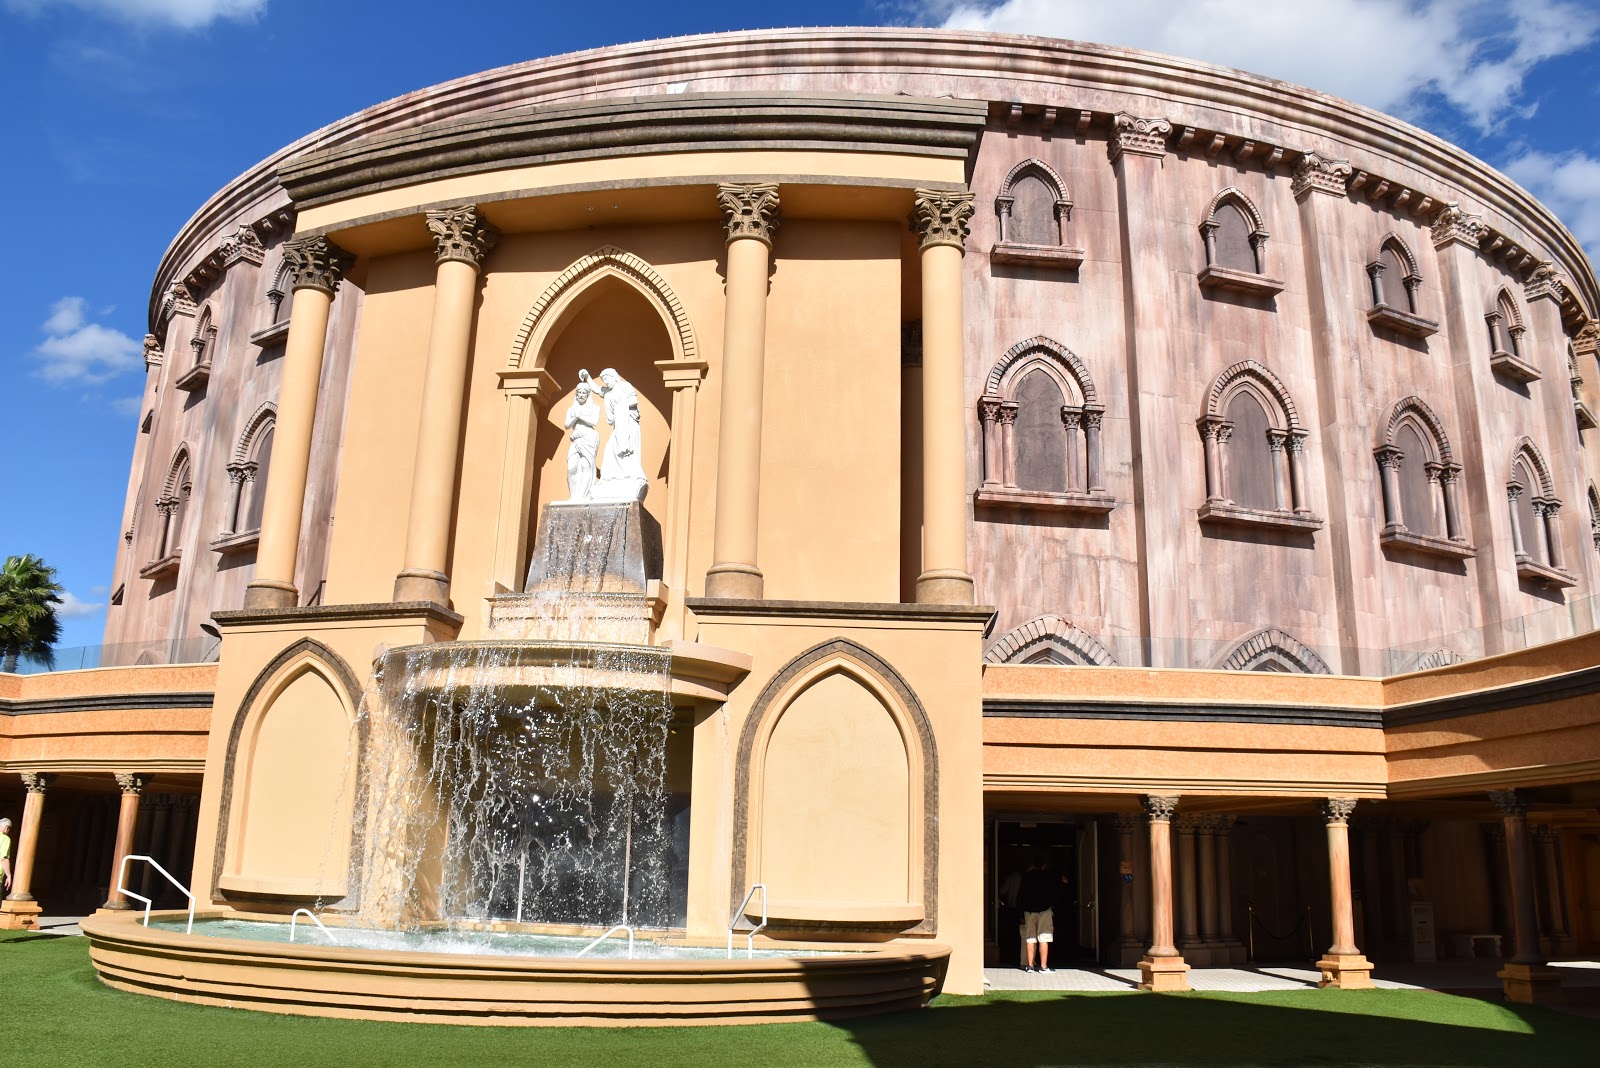 The Holy Land Experience in Orlando Florida Review